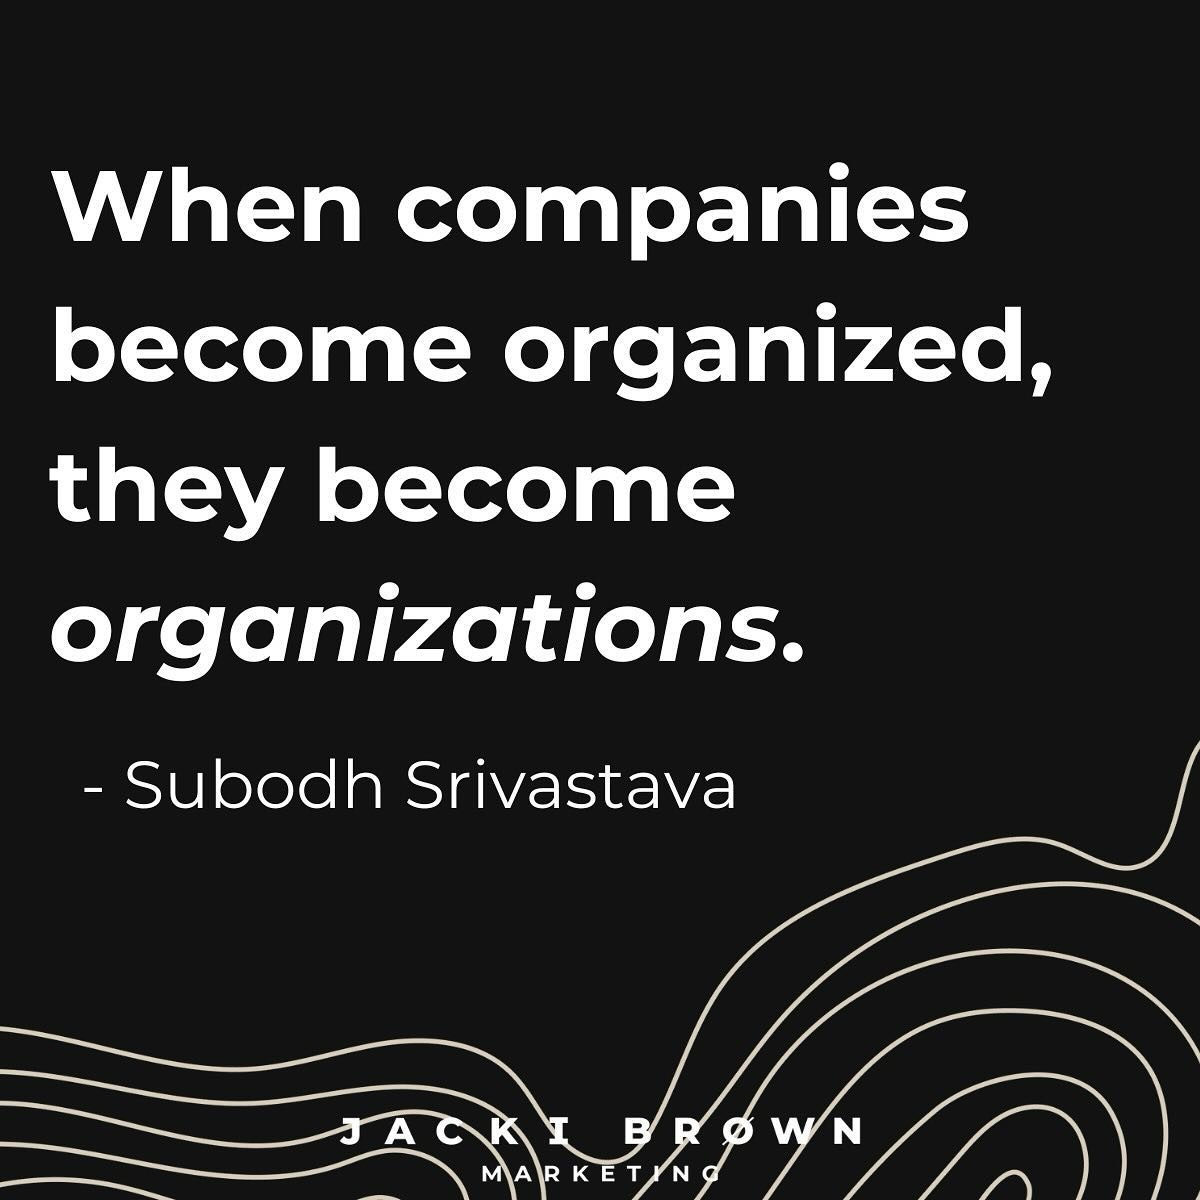 Yesterday in a conversation with Subodh Srivastava, he said, &ldquo;When companies become organized, they become organizations.&rdquo; 💥

This spoke to my heart as someone who loves creating organization and process! Happy Friday!

#startup #startup